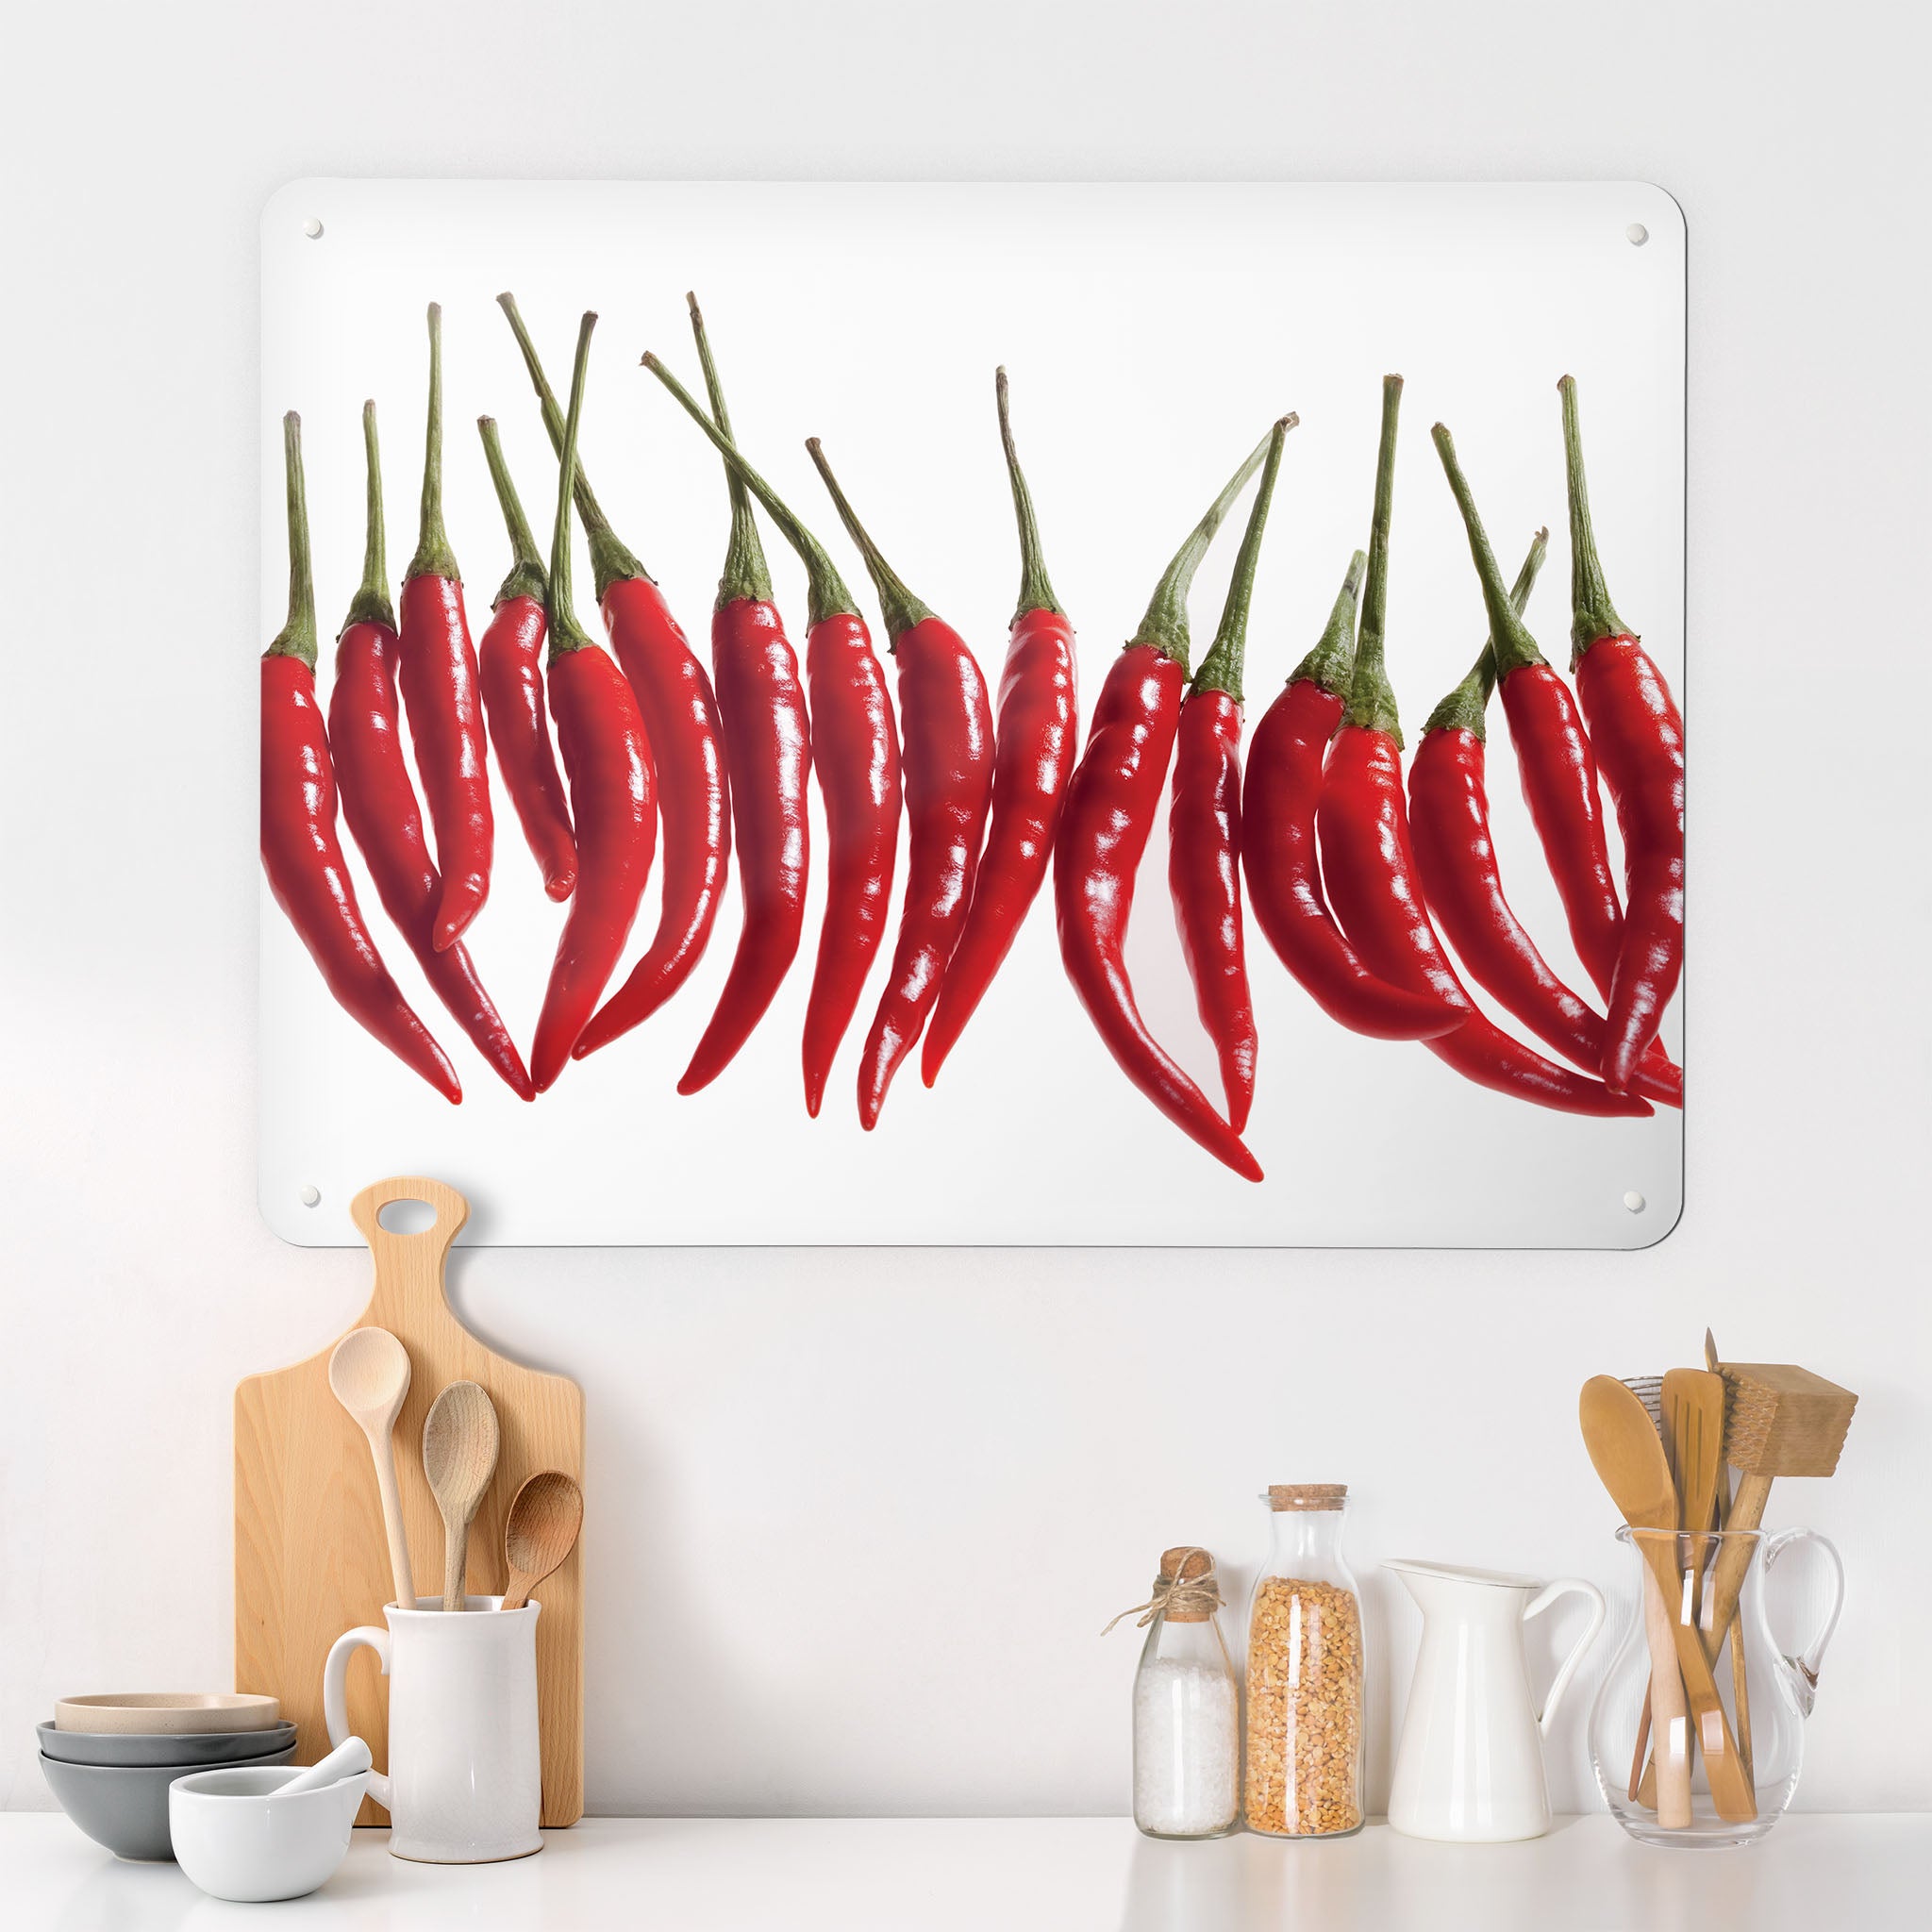 A kitchen interior with a magnetic metal wall art panel showing a photograph of a line of red chillies